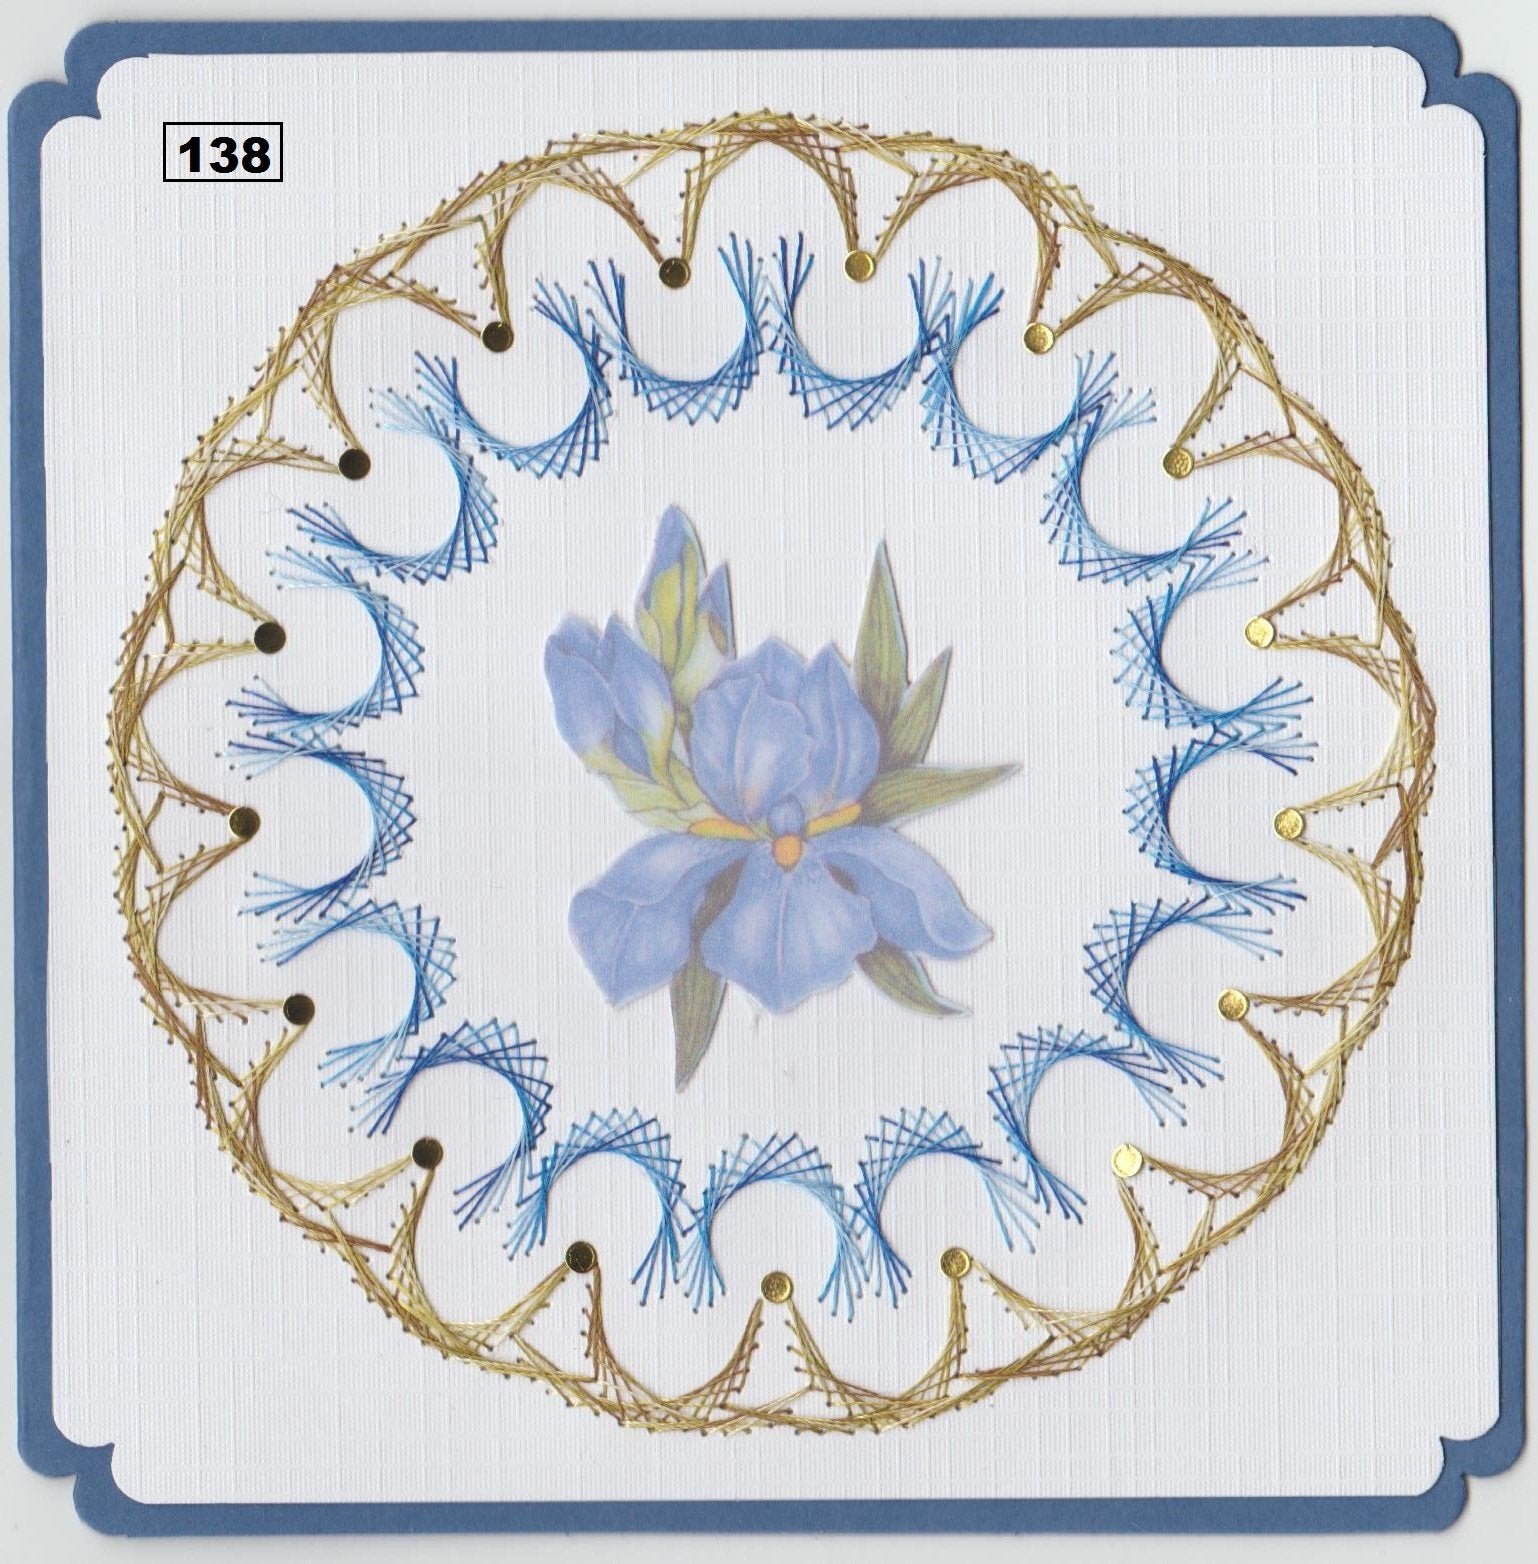 Laura's Design Digital Embroidery Pattern - Detailed Circle Frame